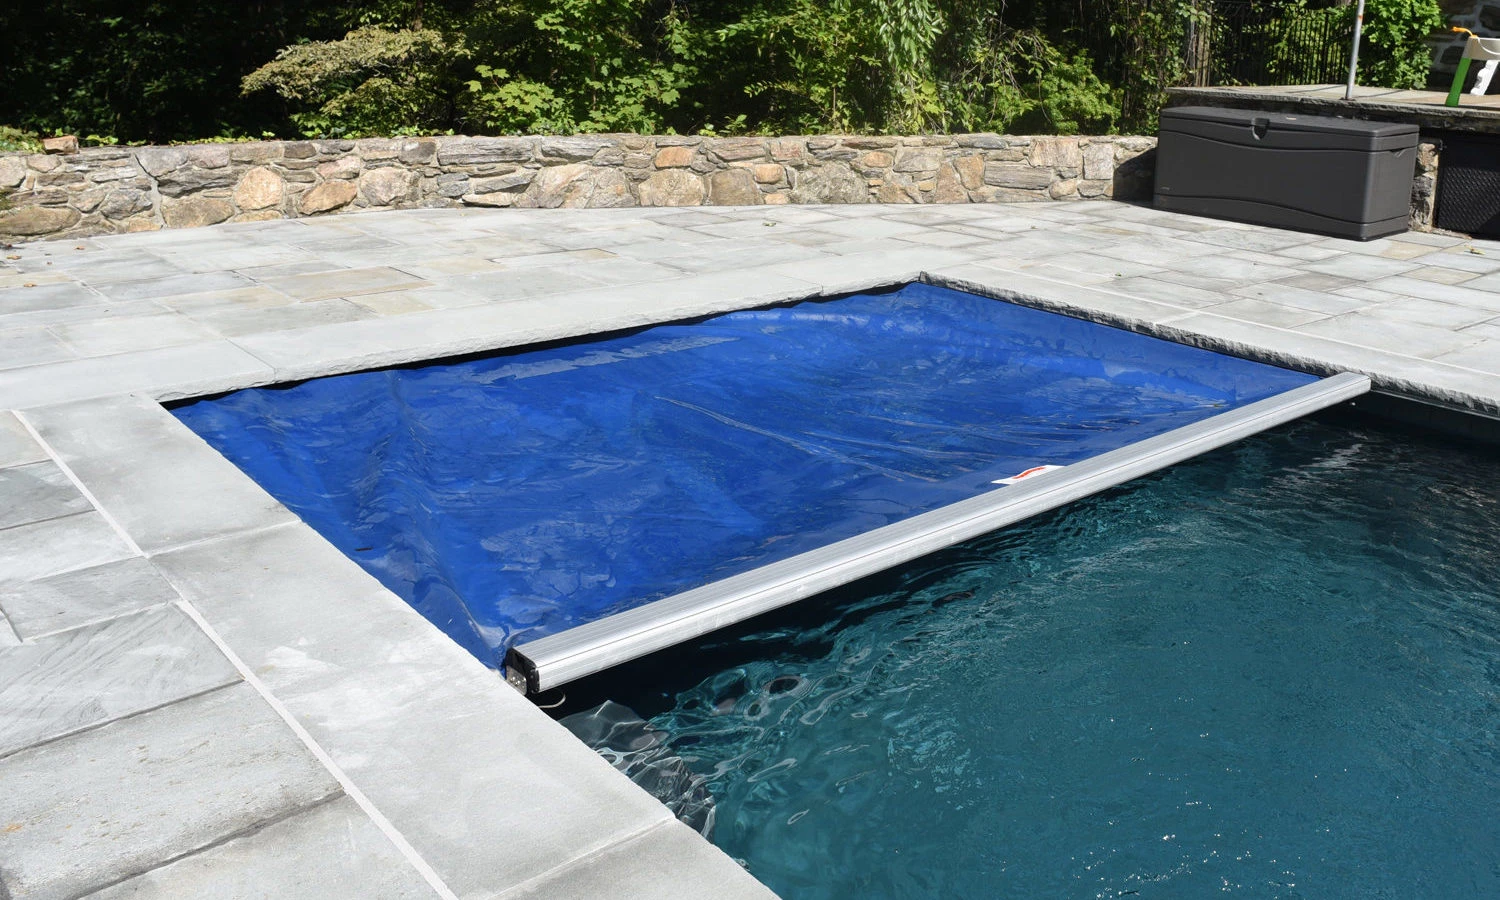 If you're thinking about installing a swimming pool heat pump for your own pool, it's recommended that you use a pool cover. It is particularly practical since it prevents the pool water from losing heat (especially at night) - the use of a pool cover can save up to 50% on energy costs.